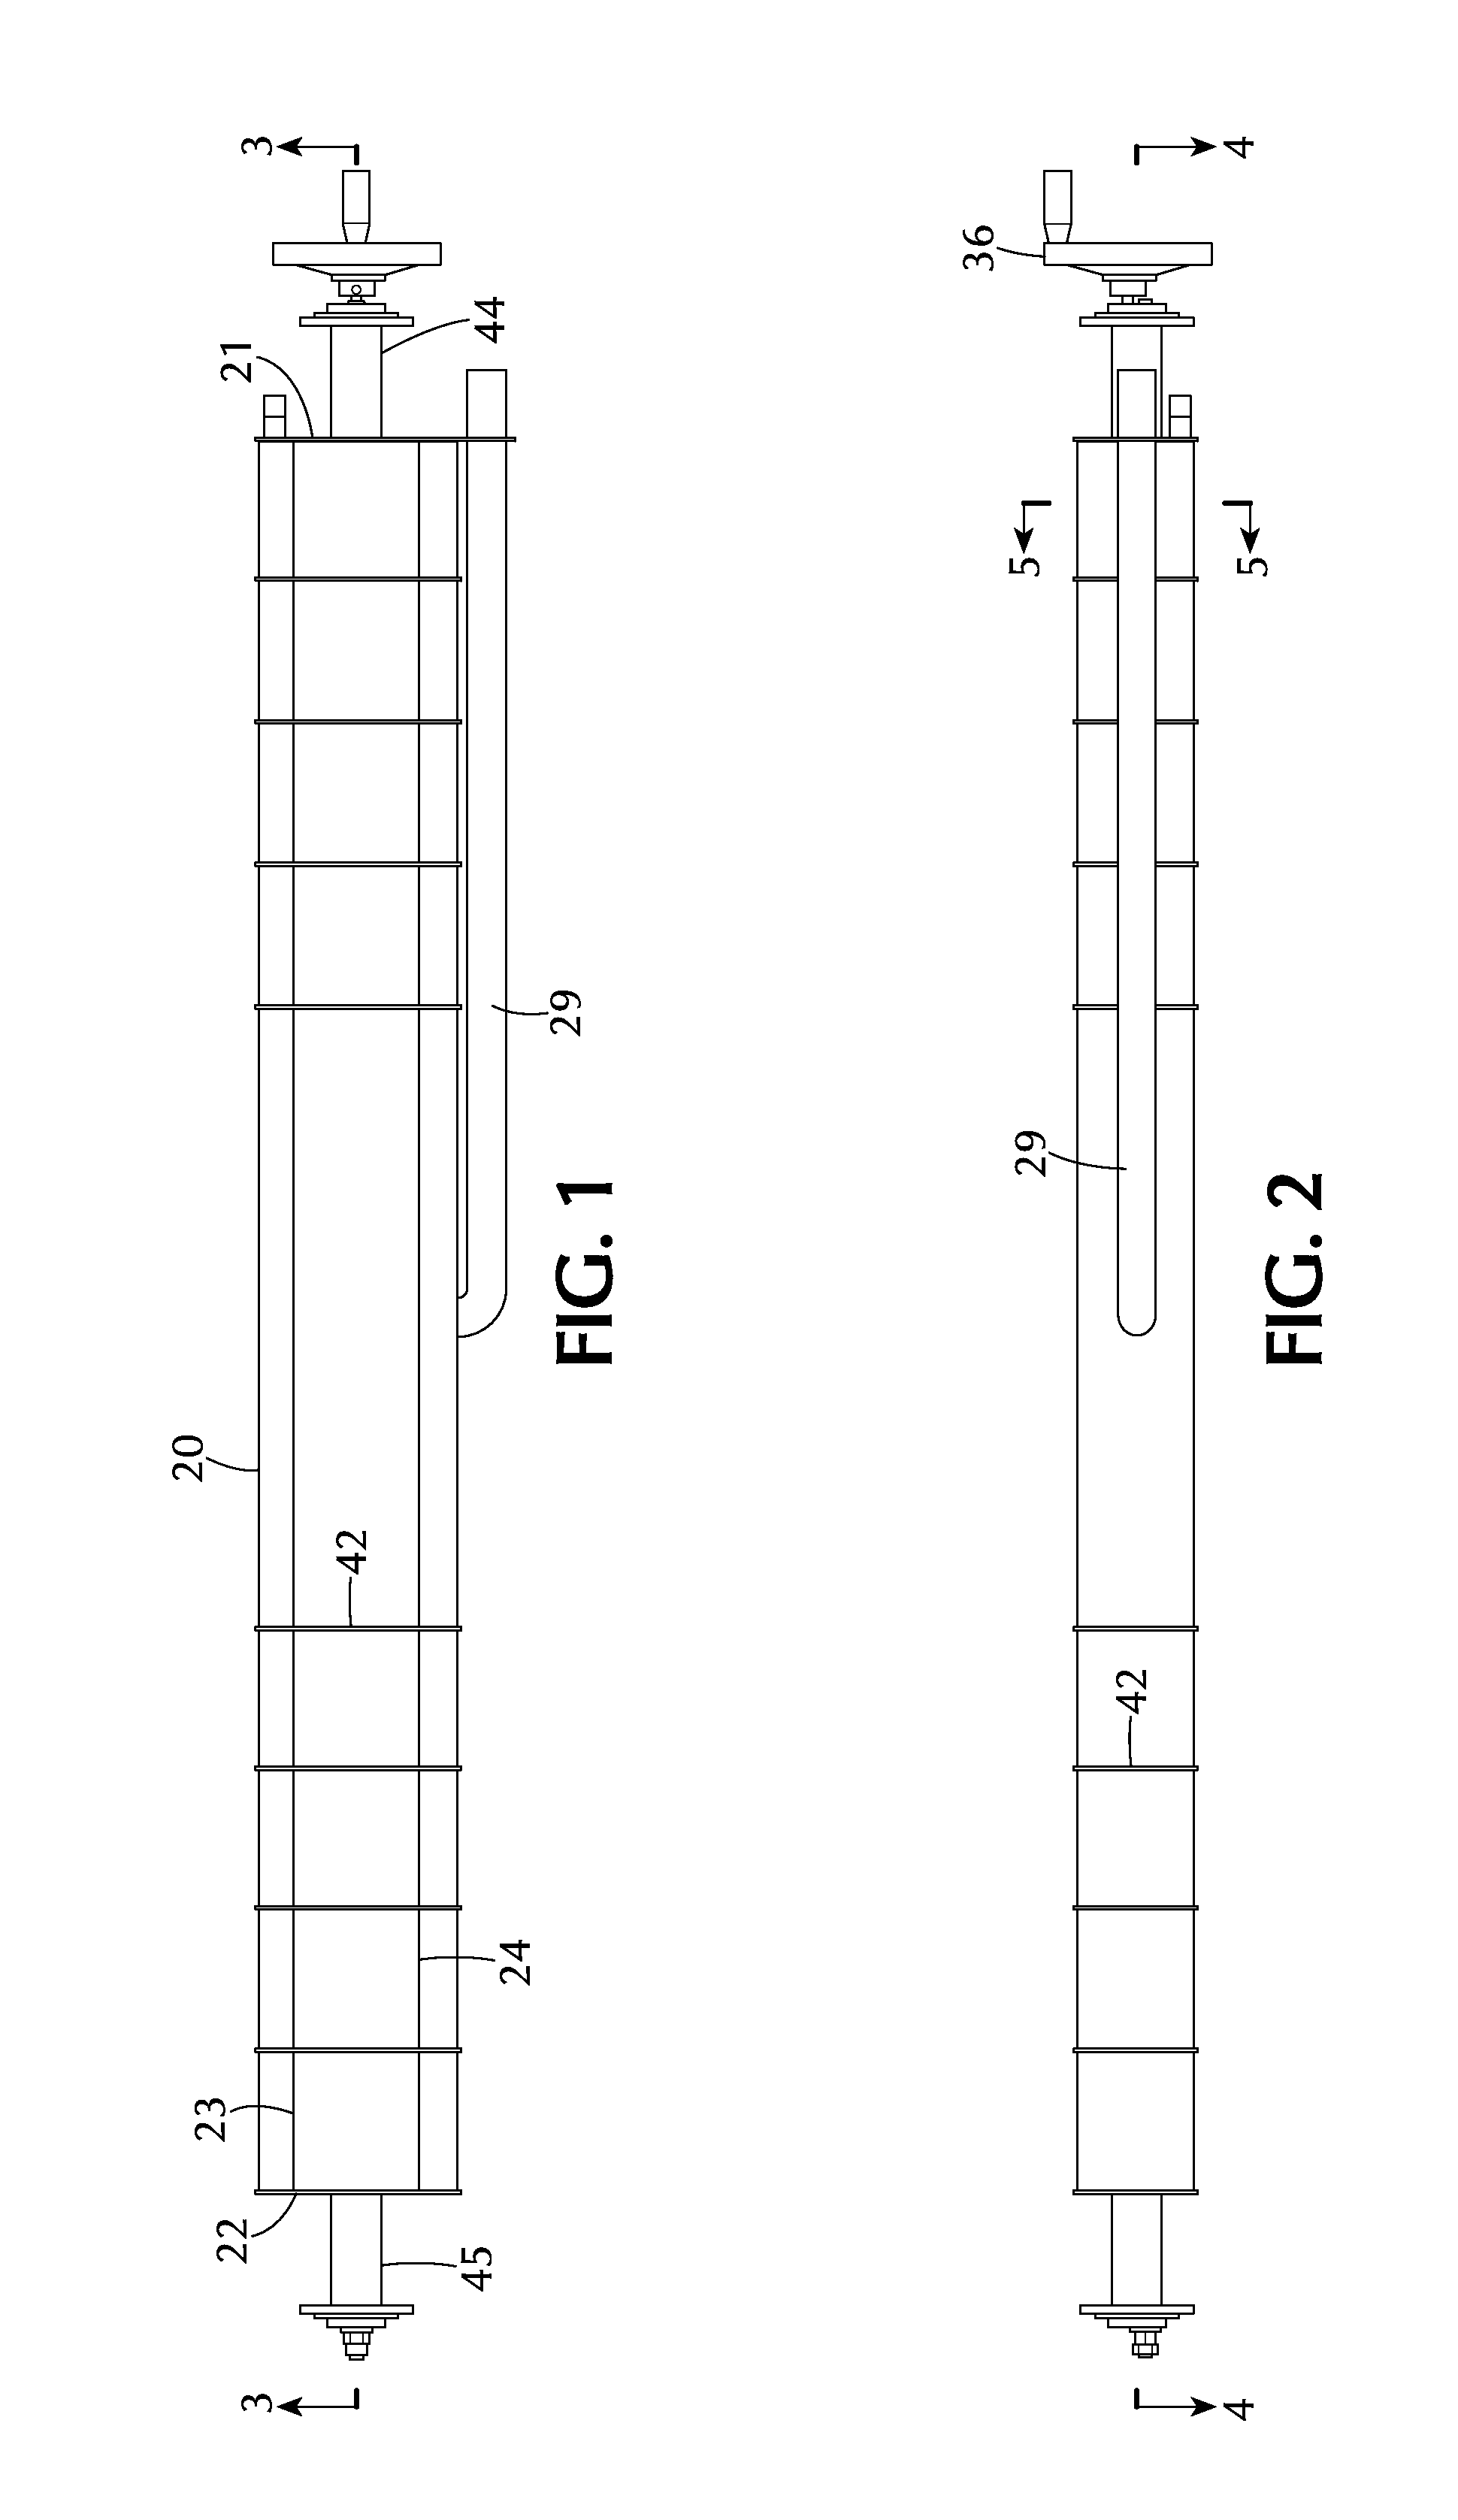 Adjustable width steam box for fabric processing and method of using the same